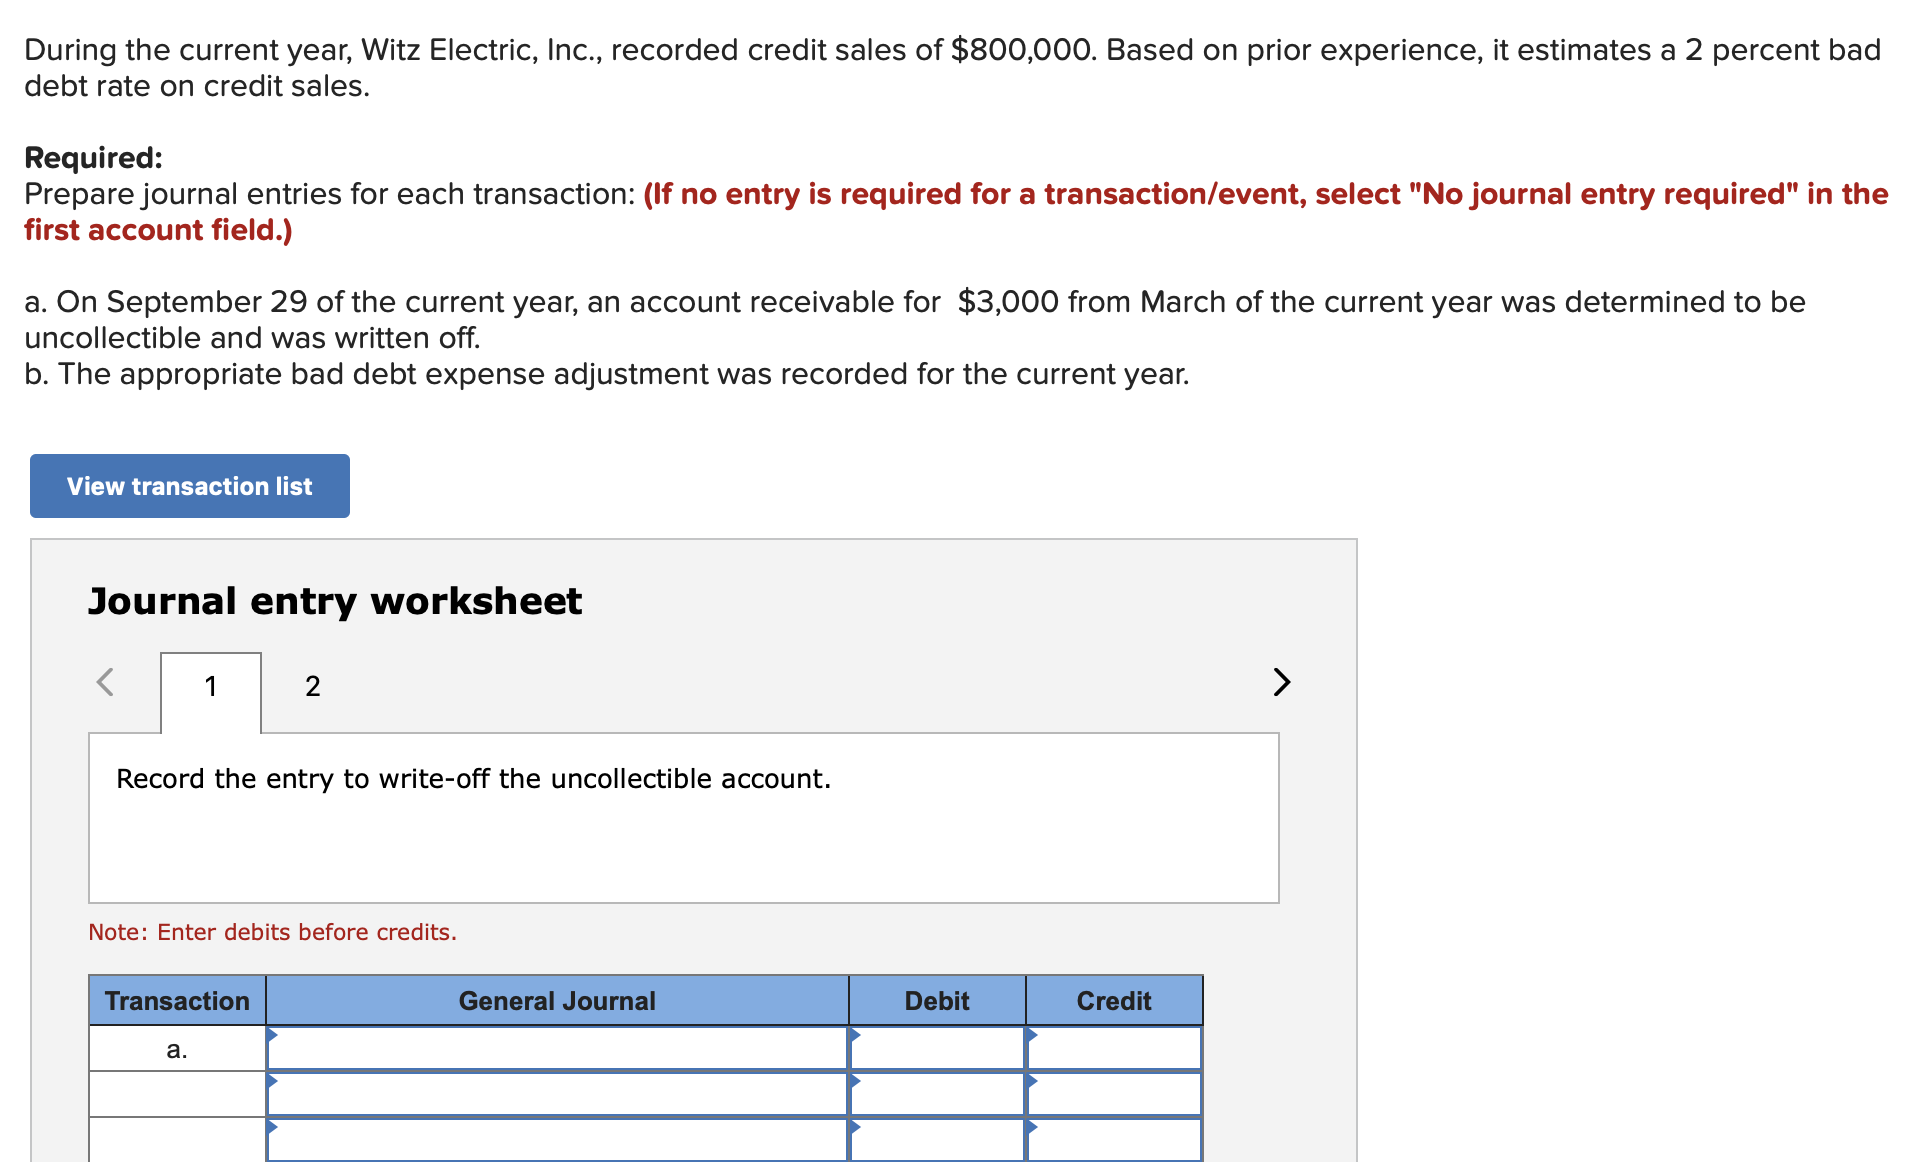 During the current year, Witz Electric, Inc., recorded credit sales of $800,000. Based on prior experience, it estimates a 2 percent bad
debt rate on credit sales.
Required:
Prepare journal entries for each transaction: (lf no entry is required for a transaction/event, select "No journal entry required" in the
first account field.)
a. On September 29 of the current year, an account receivable for $3,000 from March of the current year was determined to be
uncollectible and was written off.
b. The appropriate bad debt expense adjustment was recorded for the current year.
View transaction list
Journal entry worksheet
2
Record the entry to write-off the uncollectible account
Note: Enter debits before credits.
Debit
Transaction
General Journal
Credit
а.
A
